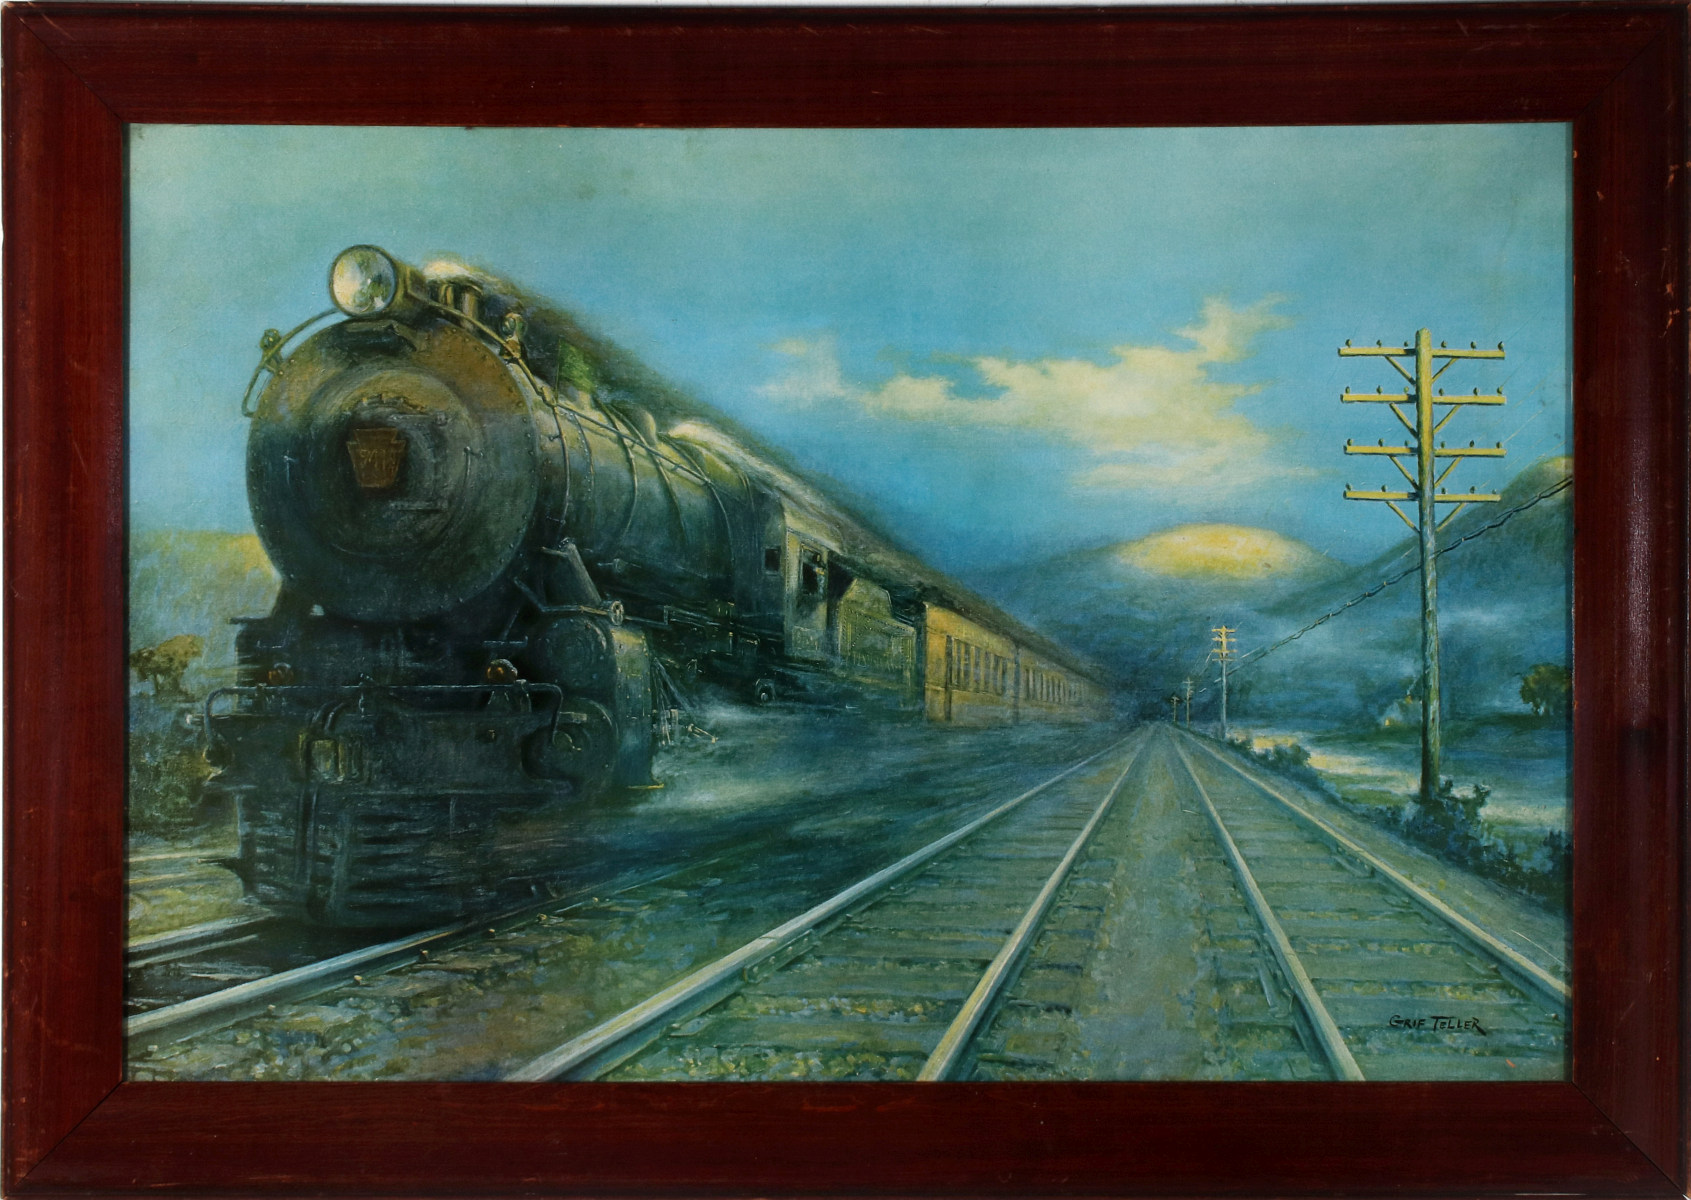 TWO COLLECTIBLE VINTAGE PRINTS WITH LOCOMOTIVES